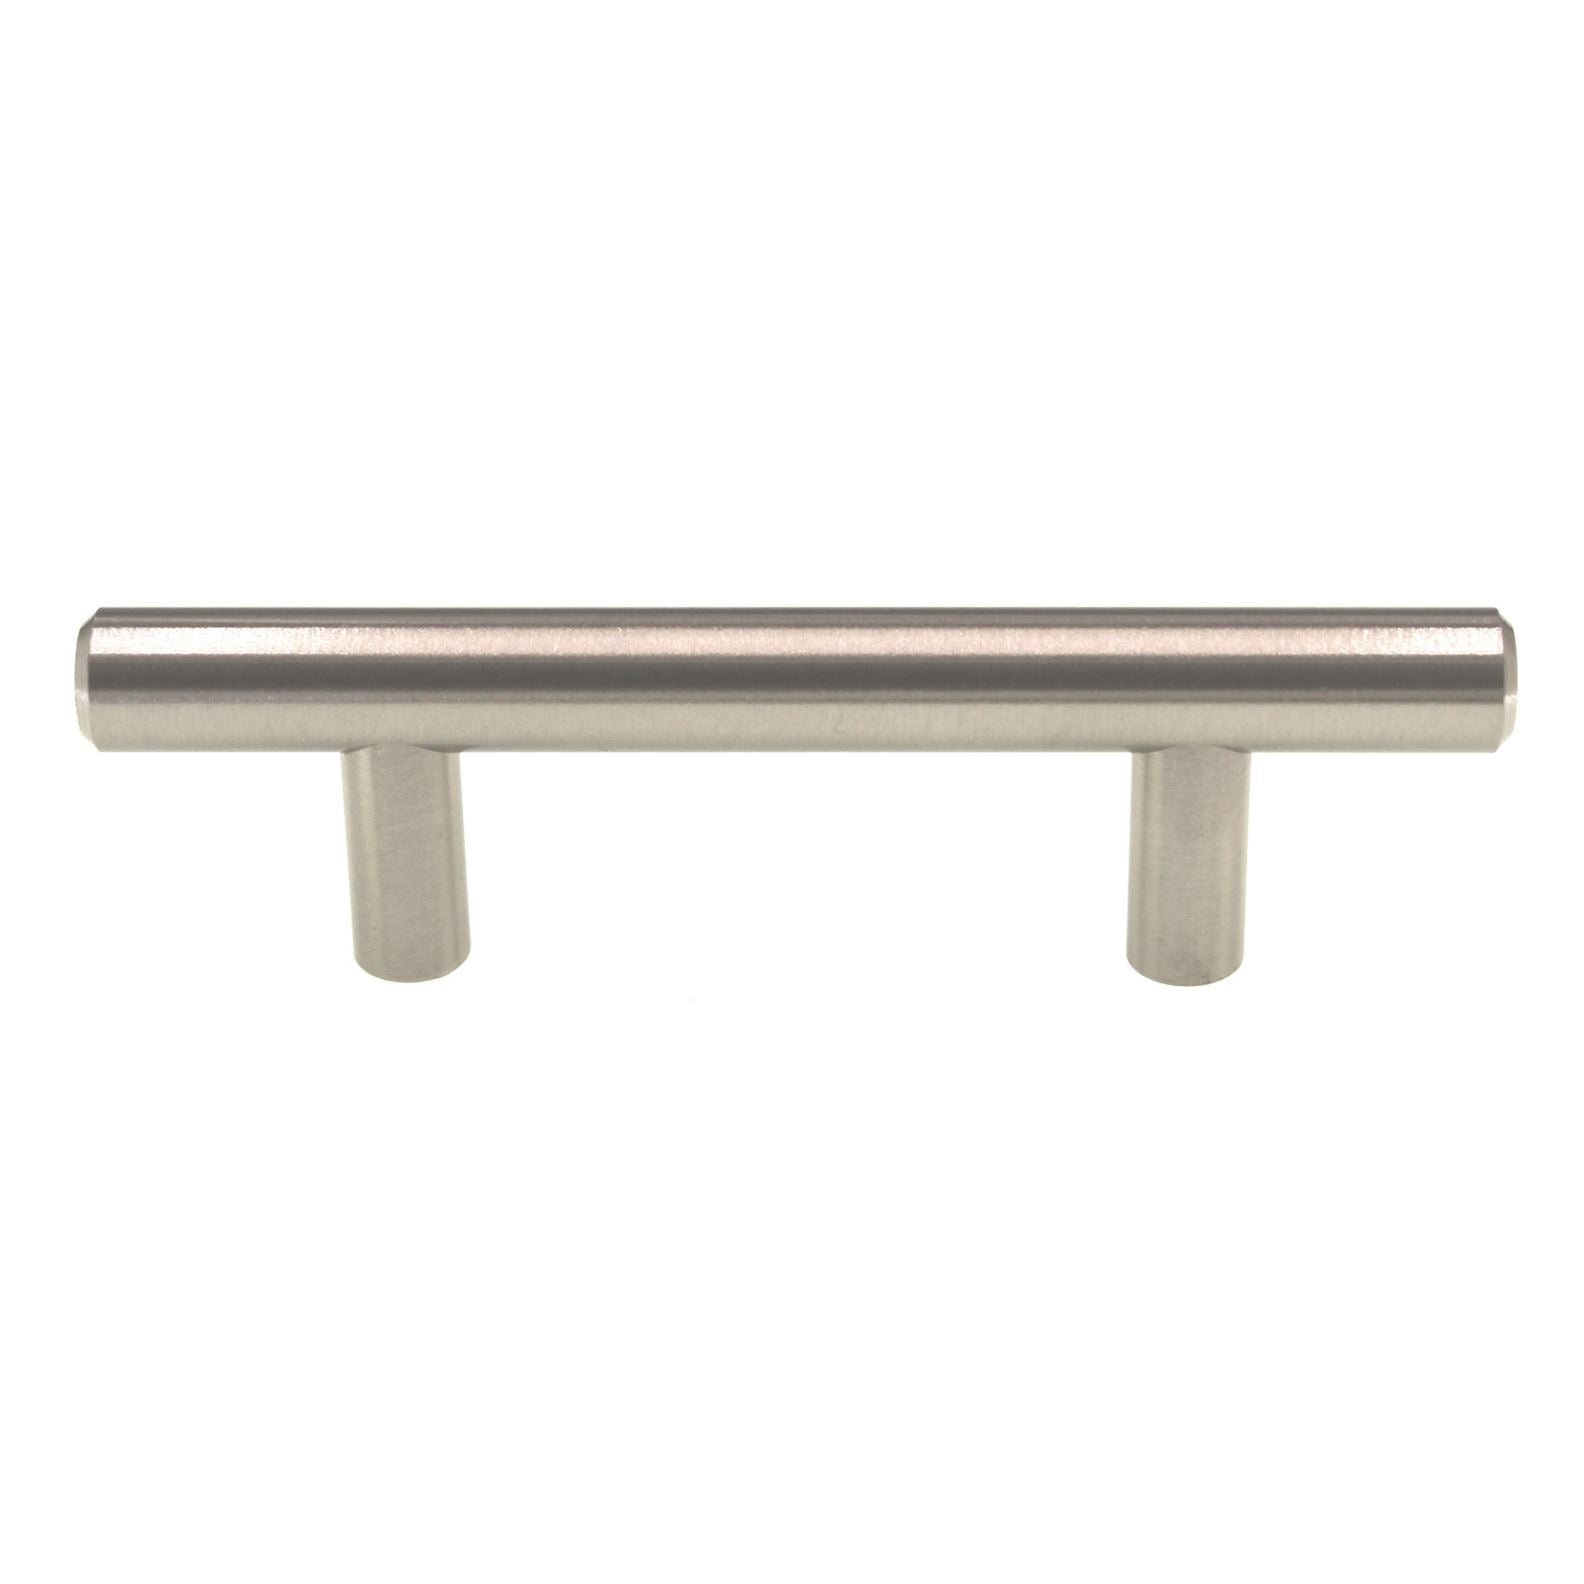 Liberty Stainless Steel 2 1/2" (64mm) Ctr. Sleek Cabinet Bar Pull P01011-SS